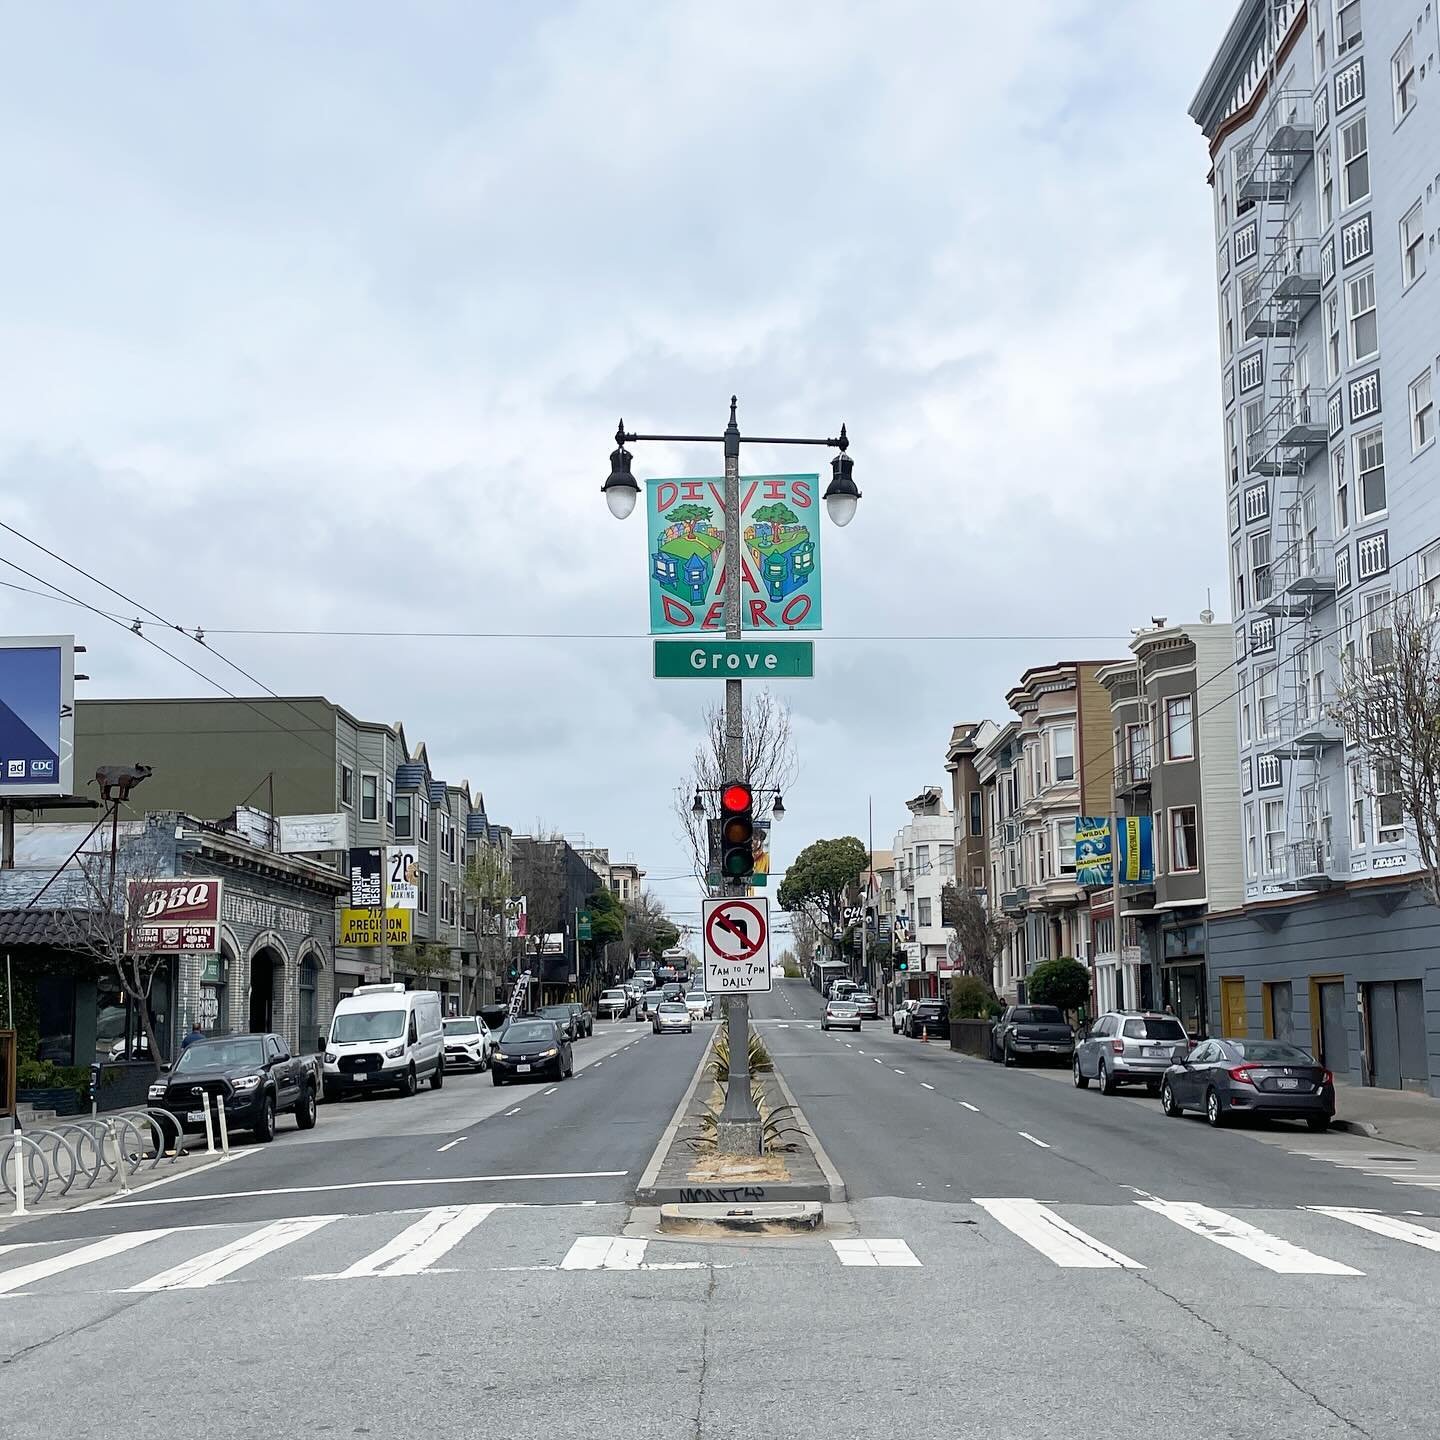 The banners I designed for the Divisadero Merchants Association are up! The drawing has Alamo Square on the left and The Panhandle on the right. It shows Divisadero as a crossroads not a dividing line. Thanks so much @divisadero.merchants for the opp